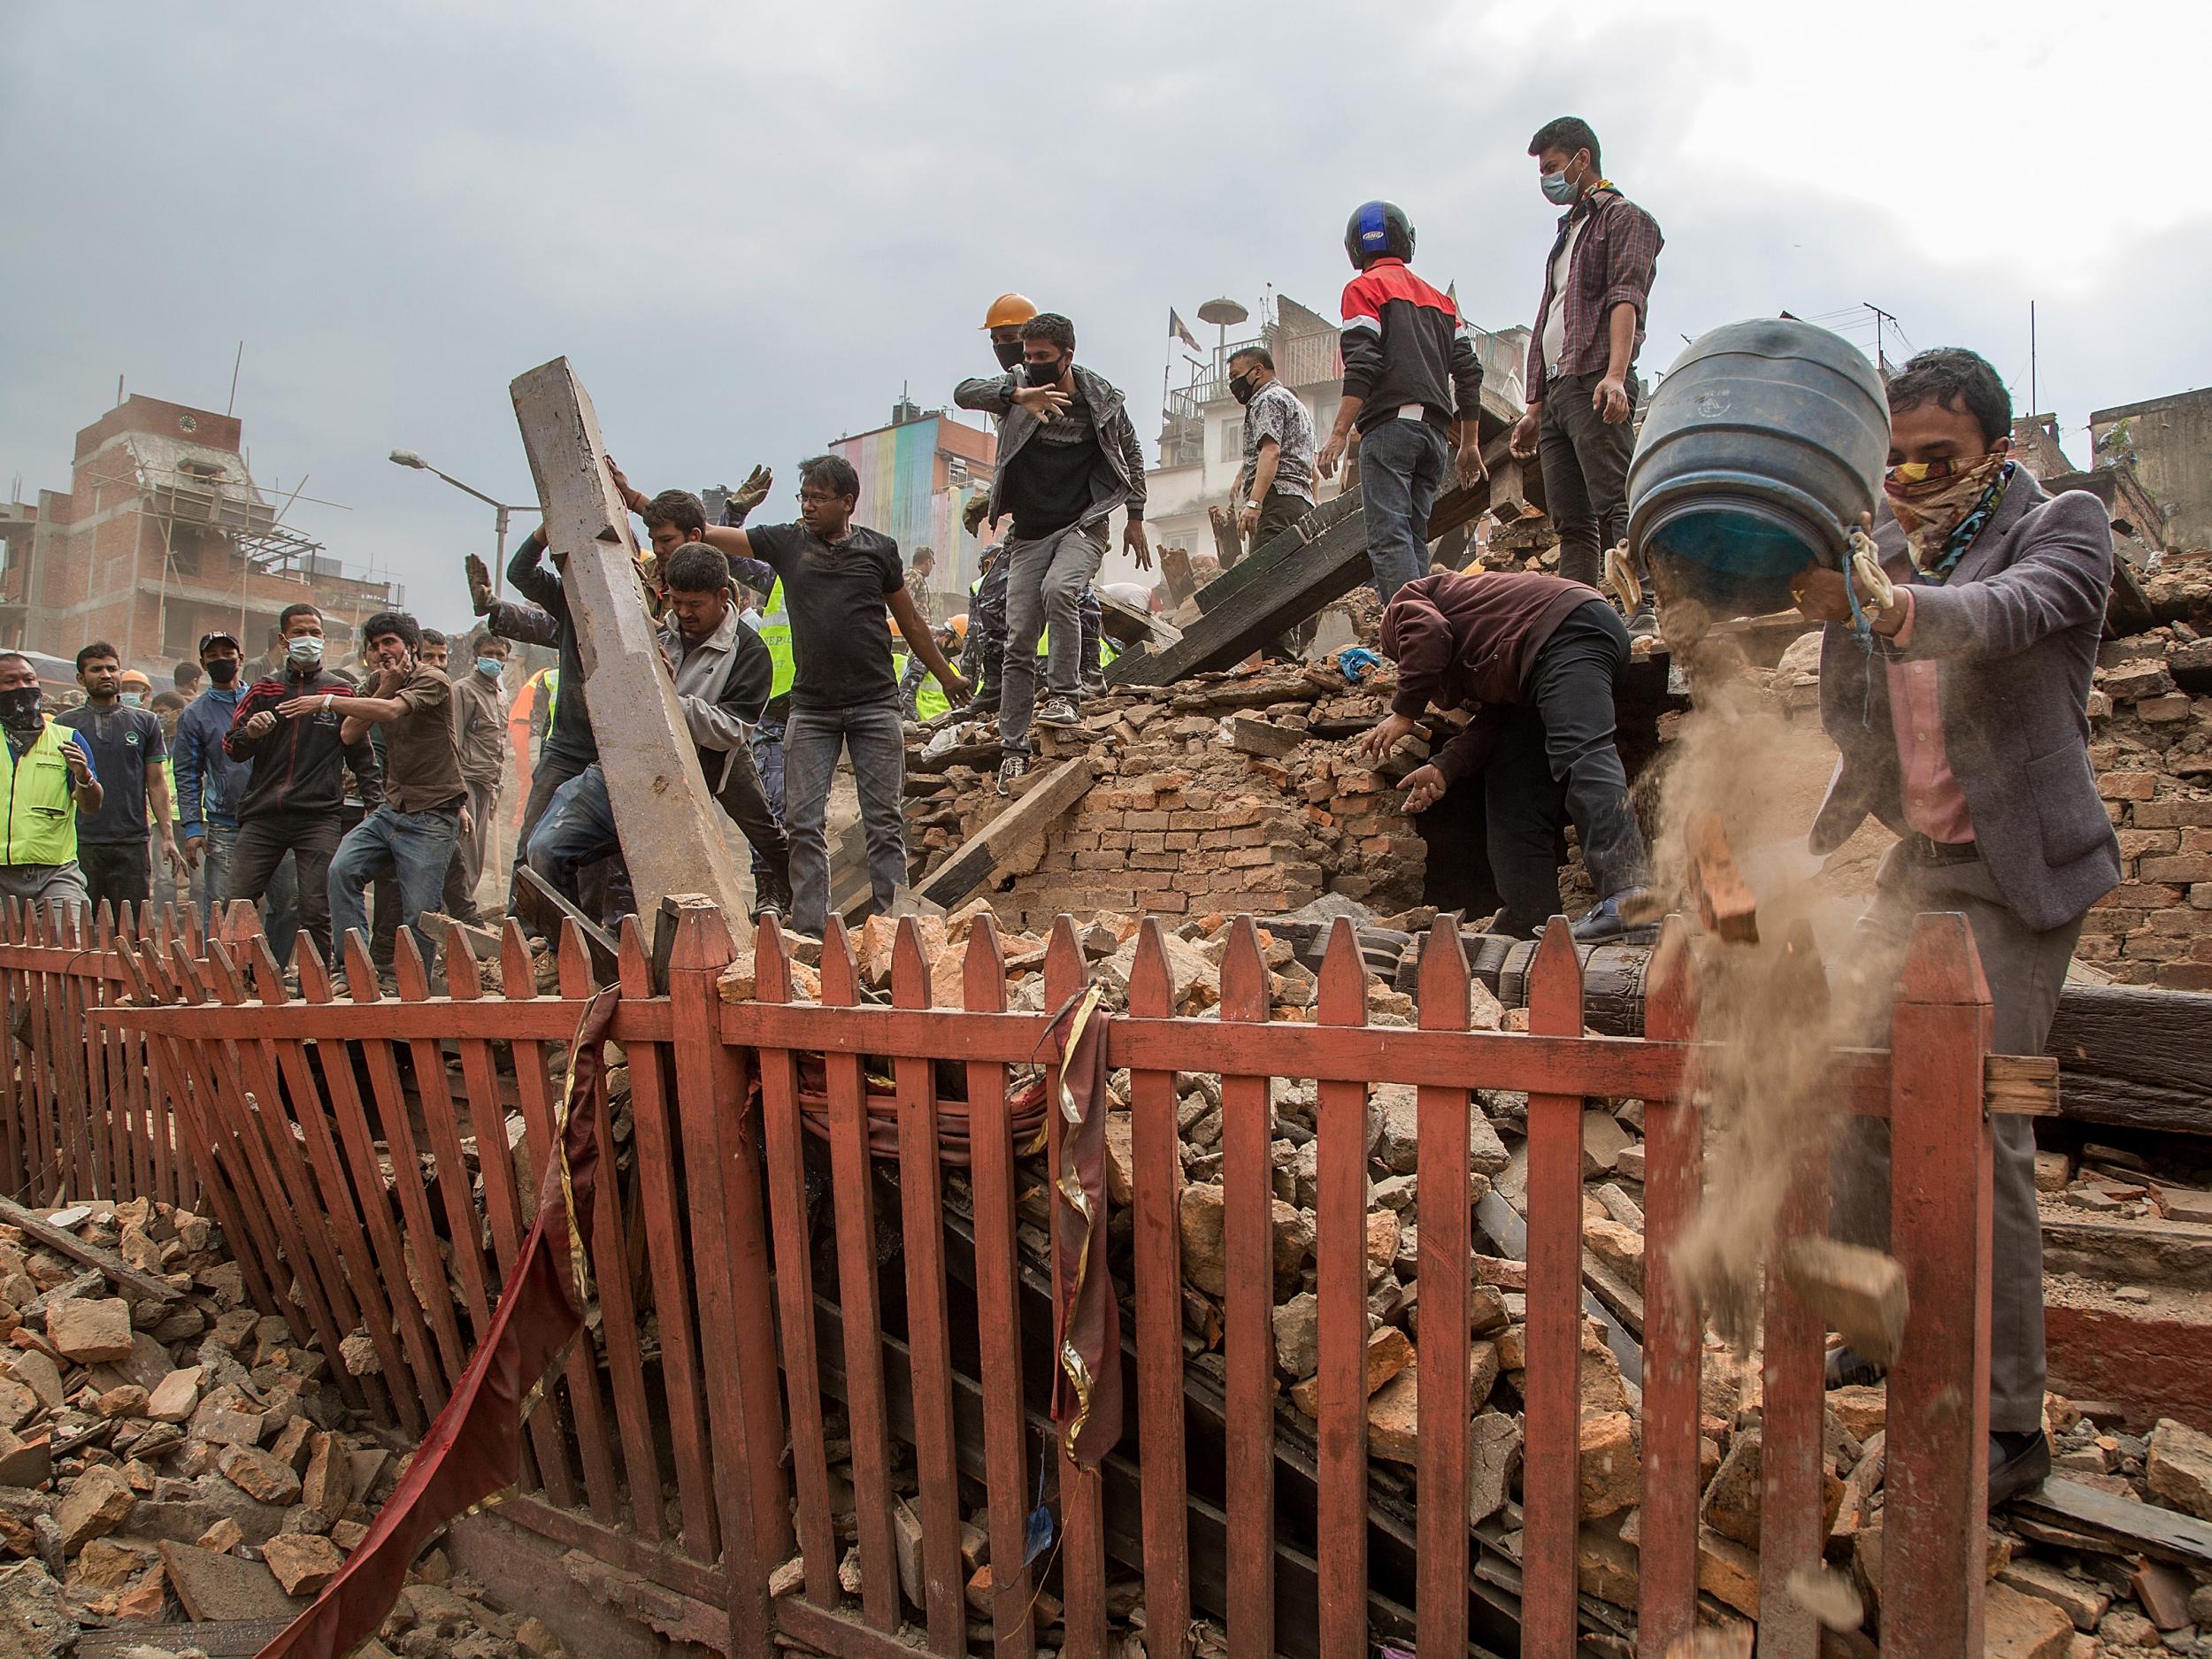 The Nepalis were granted temporary protected status (TPS) within the United States after a 7.8 magnitude earthquake in 2015